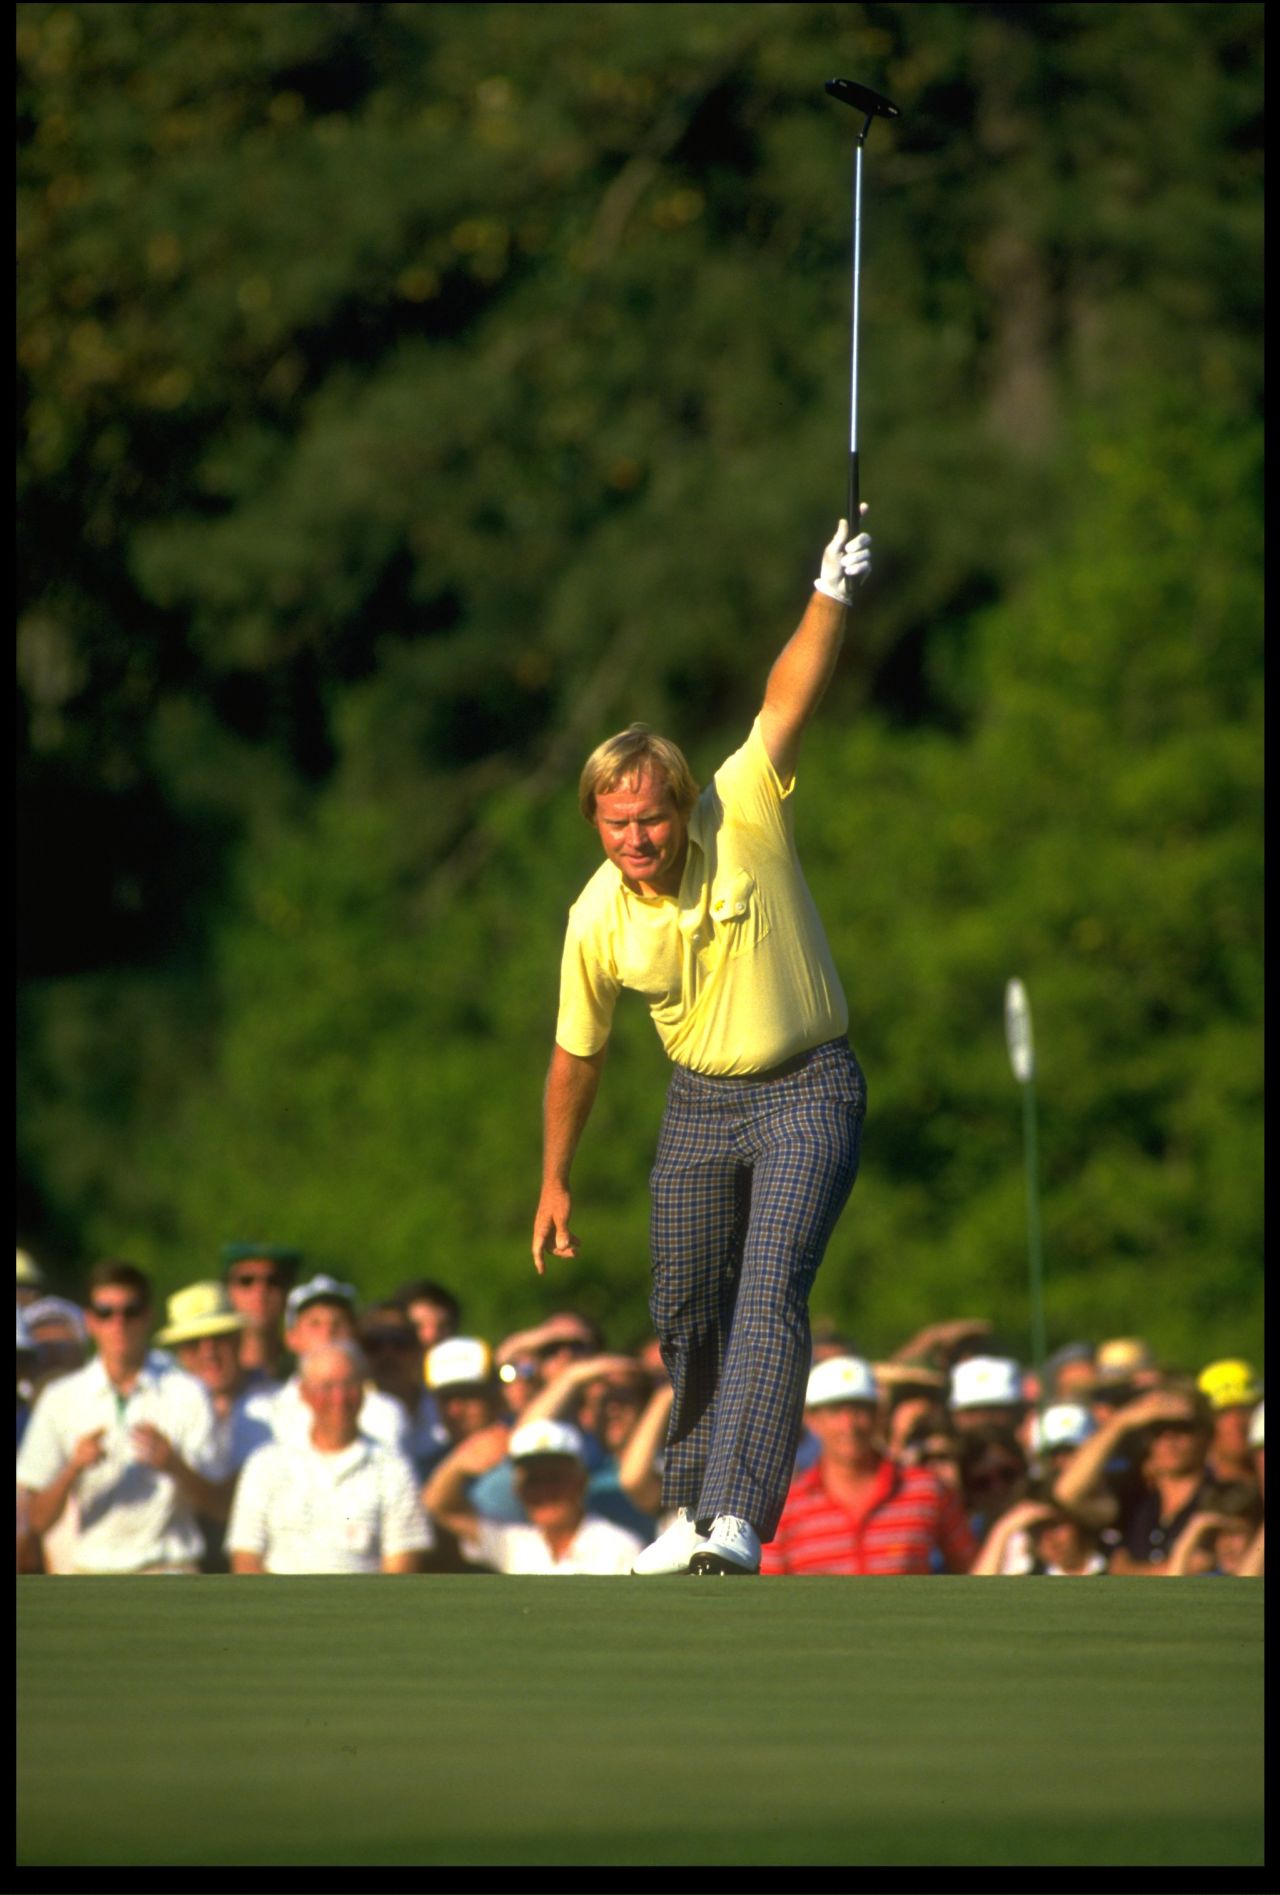 This picture captures an iconic moment in Jack Nicklaus' career -- the putt on the 17th green during the final round of the 1986 Masters that effectively sealed the last of his 18 major wins. <br /><br />Cannon had been following the leader Ballesteros, who was on the nearby 15th hole. <br /><br />Once he realized Nicklaus could win, however, he decided to hop across to the 17th to follow him through the final two holes, suspecting something special was about to happen. <br /><br />"This was one of those decisions that was a combination of luck and, I suppose, knowledge of the game," Cannon explained.